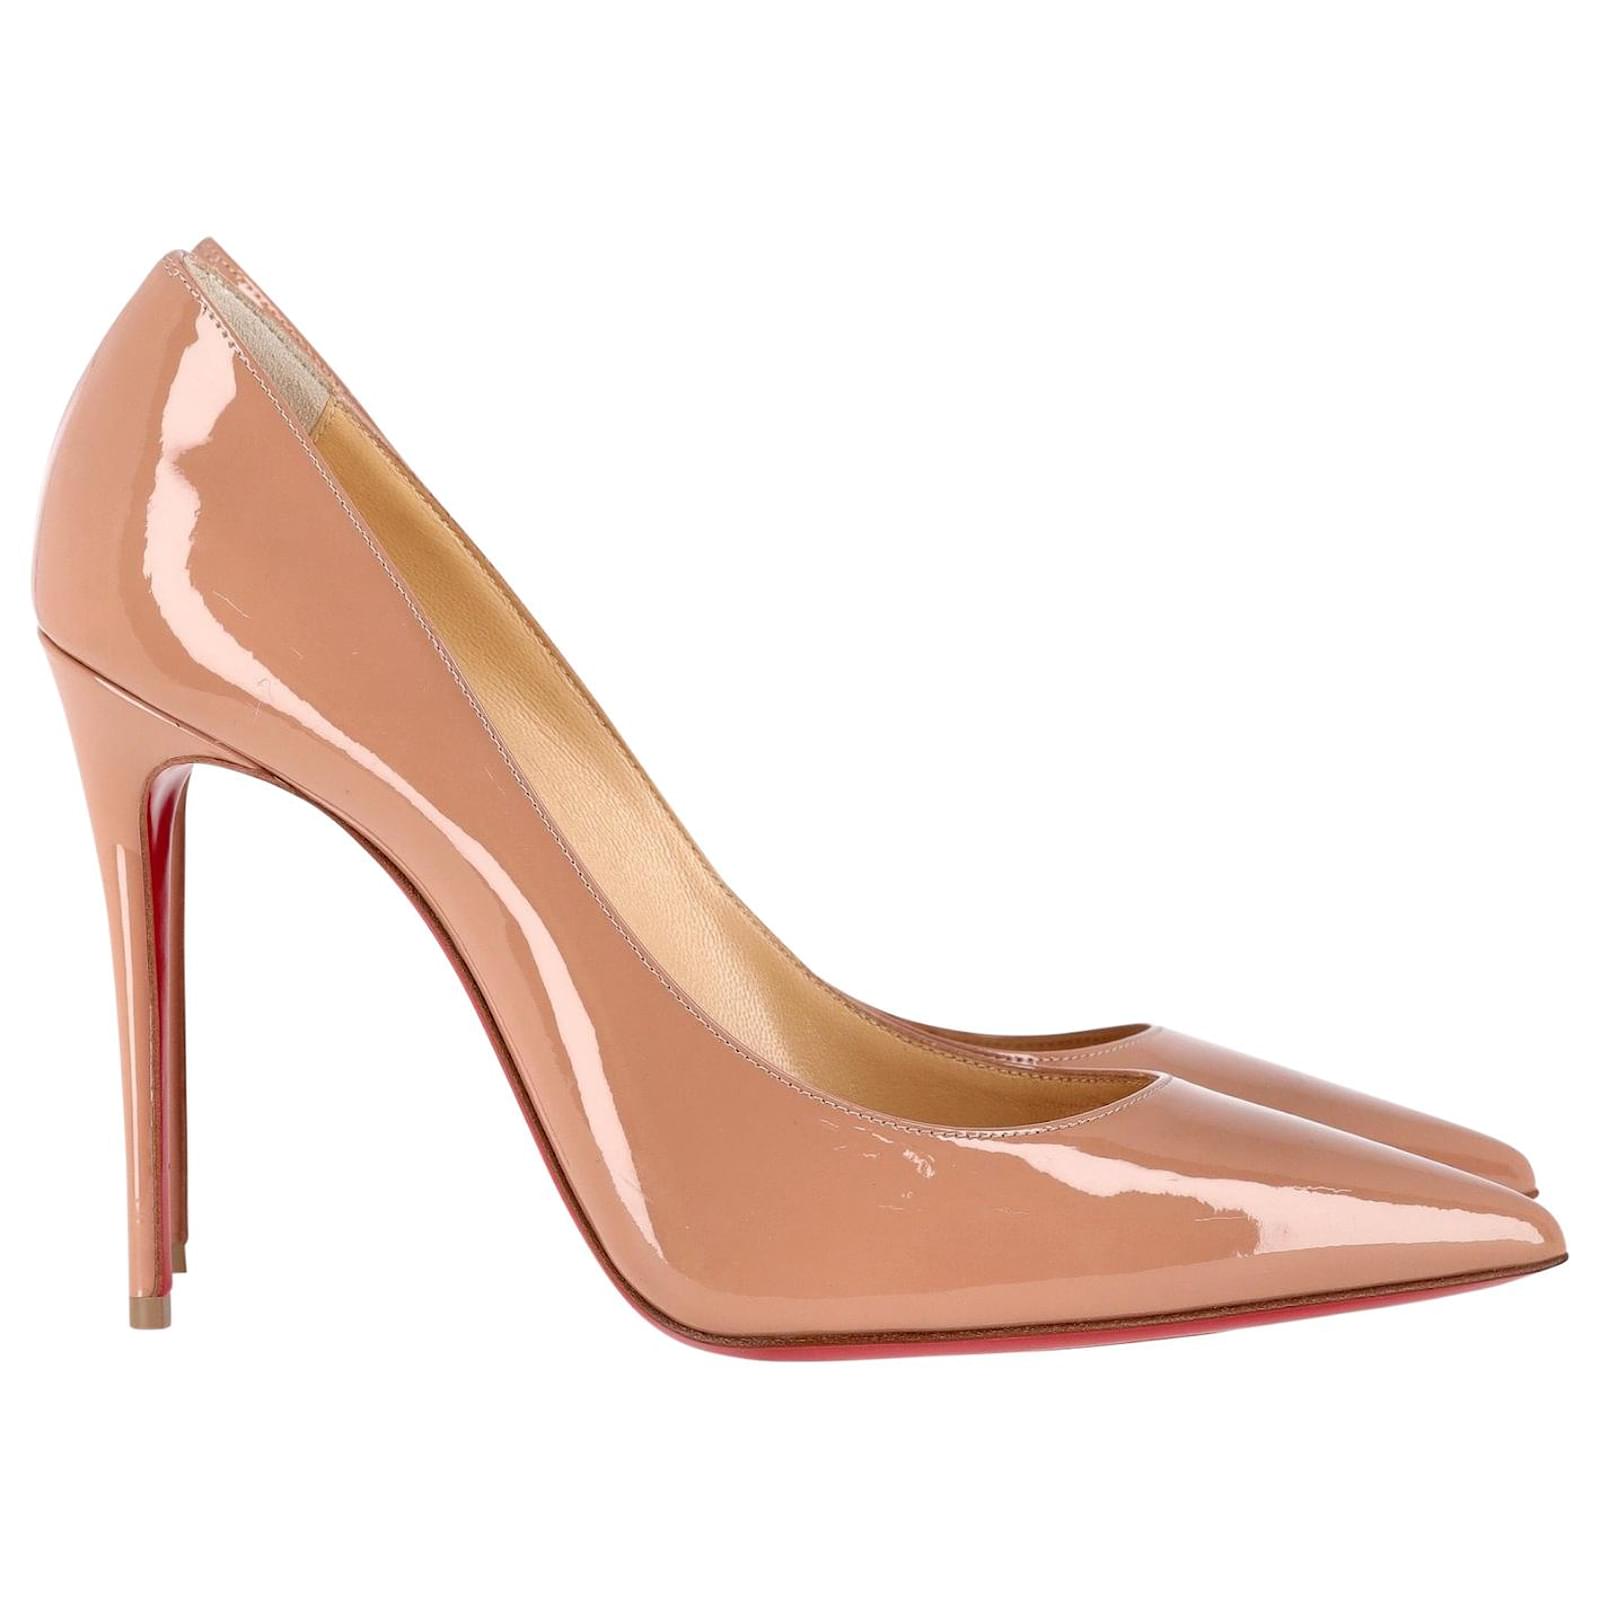 Kate 100 Leather Pumps in Brown - Christian Louboutin